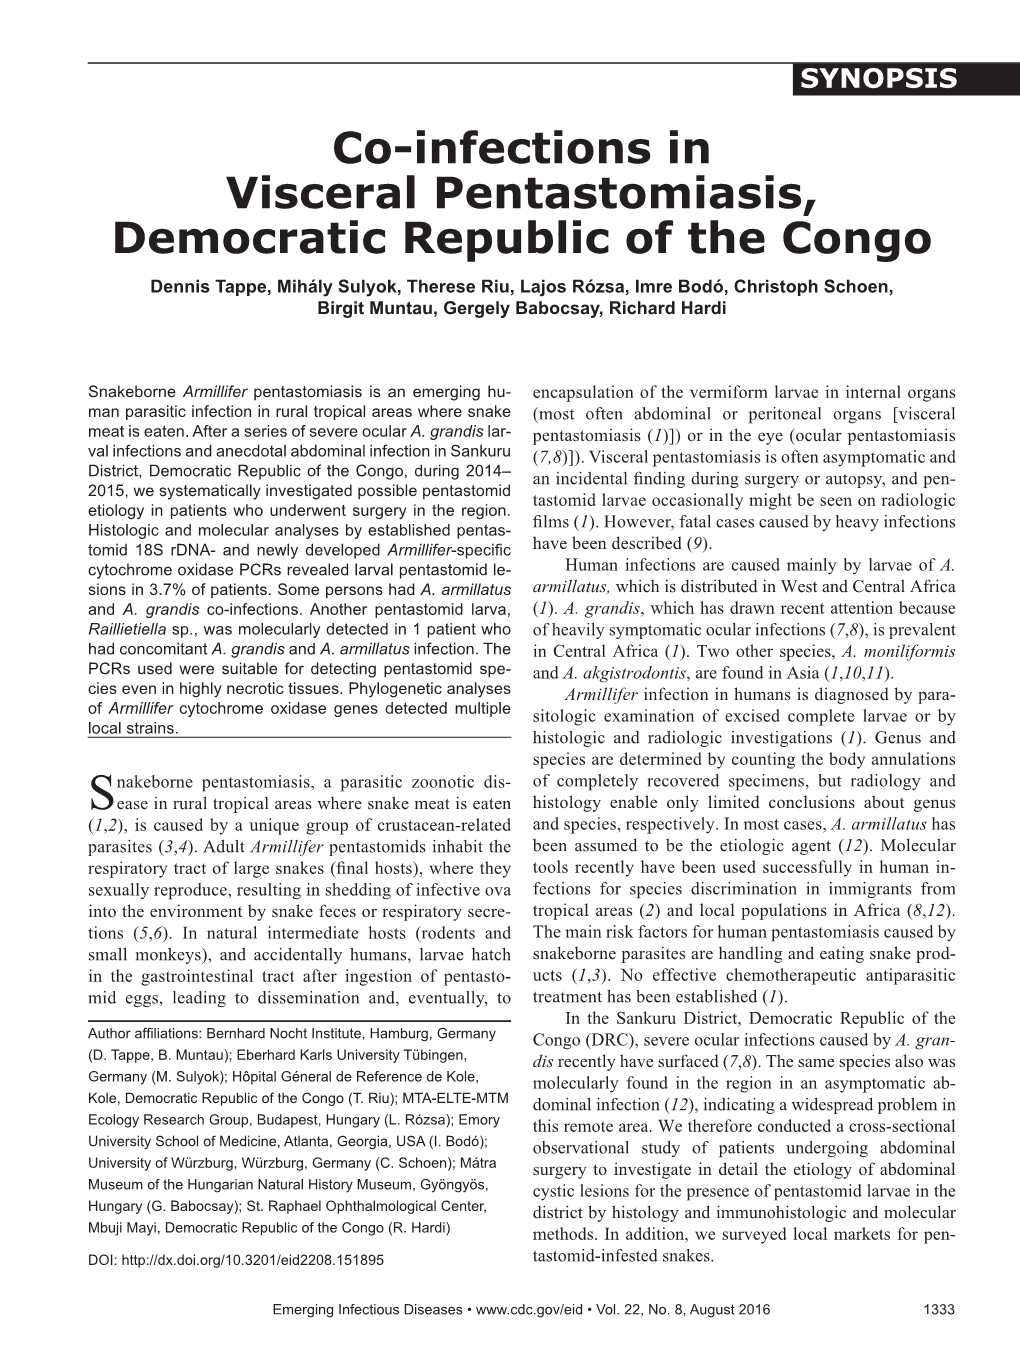 Co-Infections in Visceral Pentastomiasis, Democratic Republic of the Congo